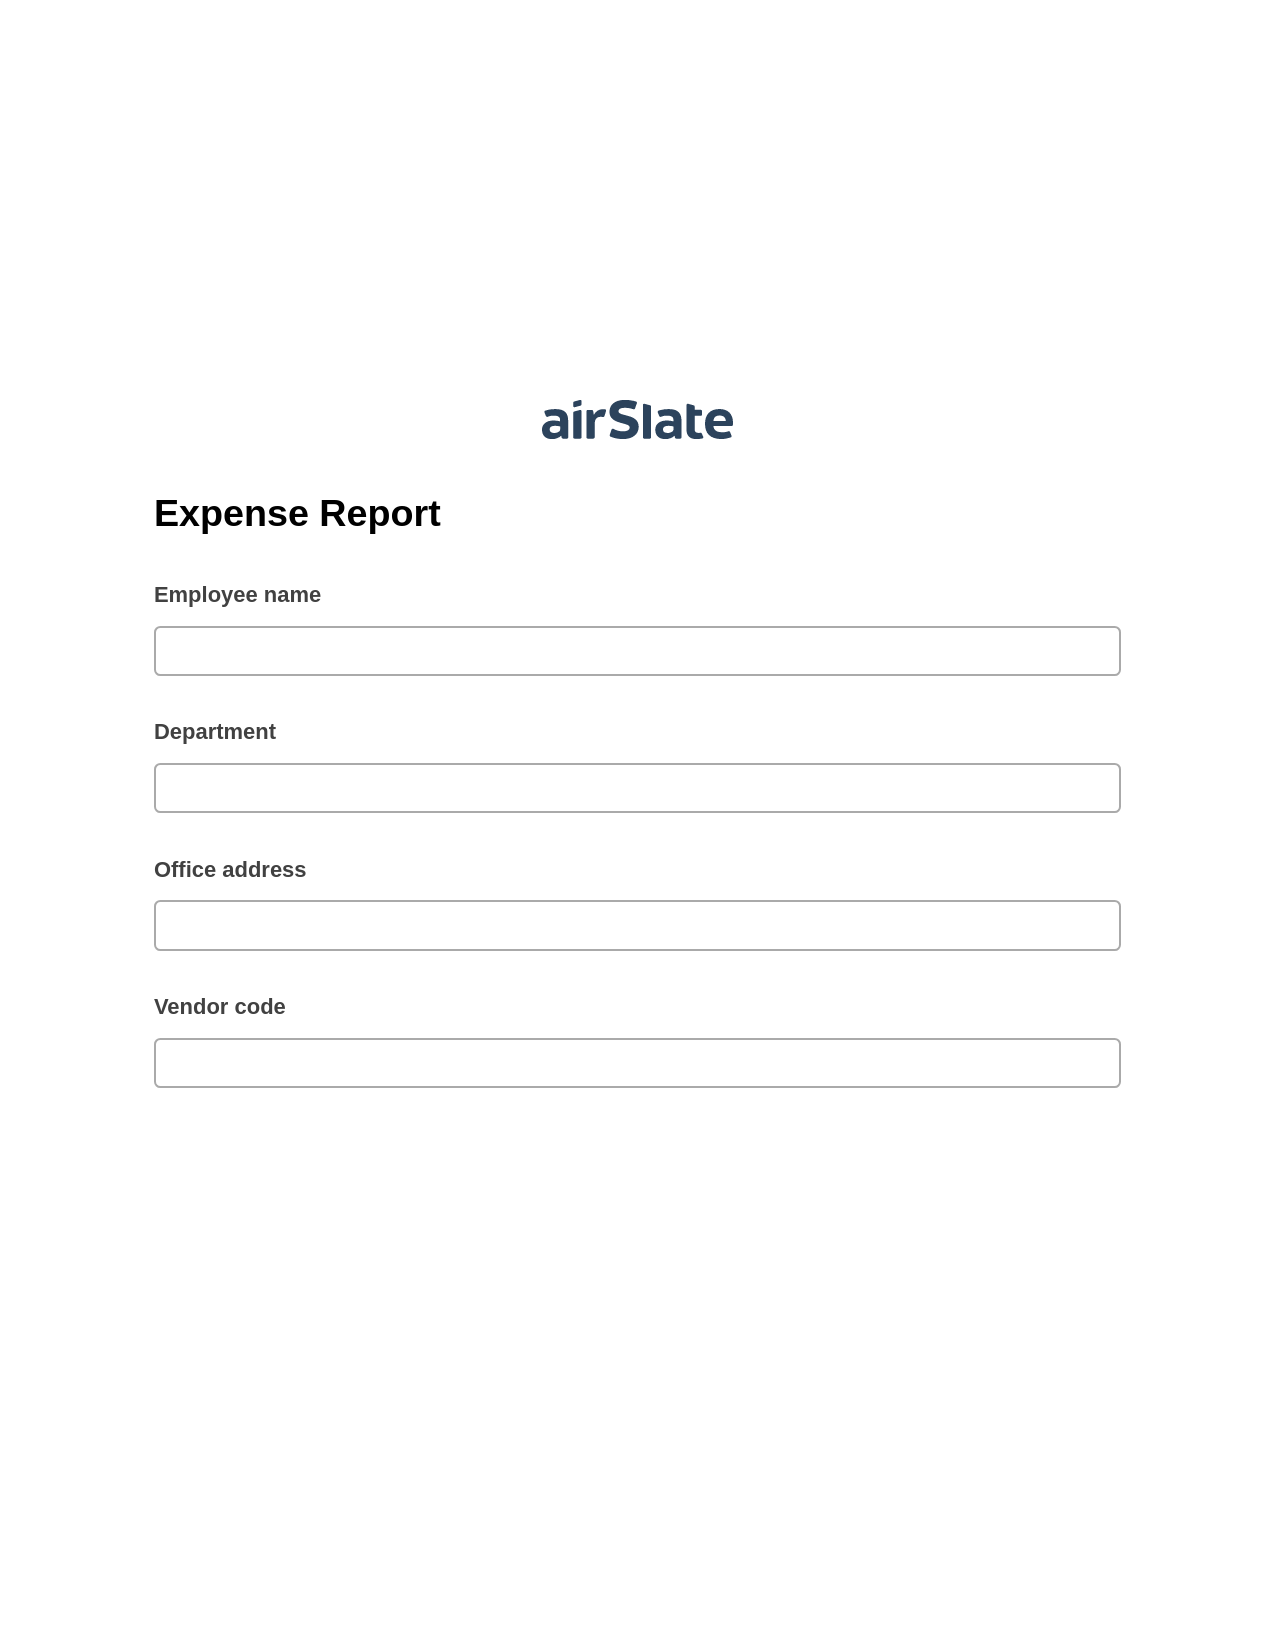 Expense Report Pre-fill from CSV File Bot, Hide Signatures Bot, Export to NetSuite Record Bot